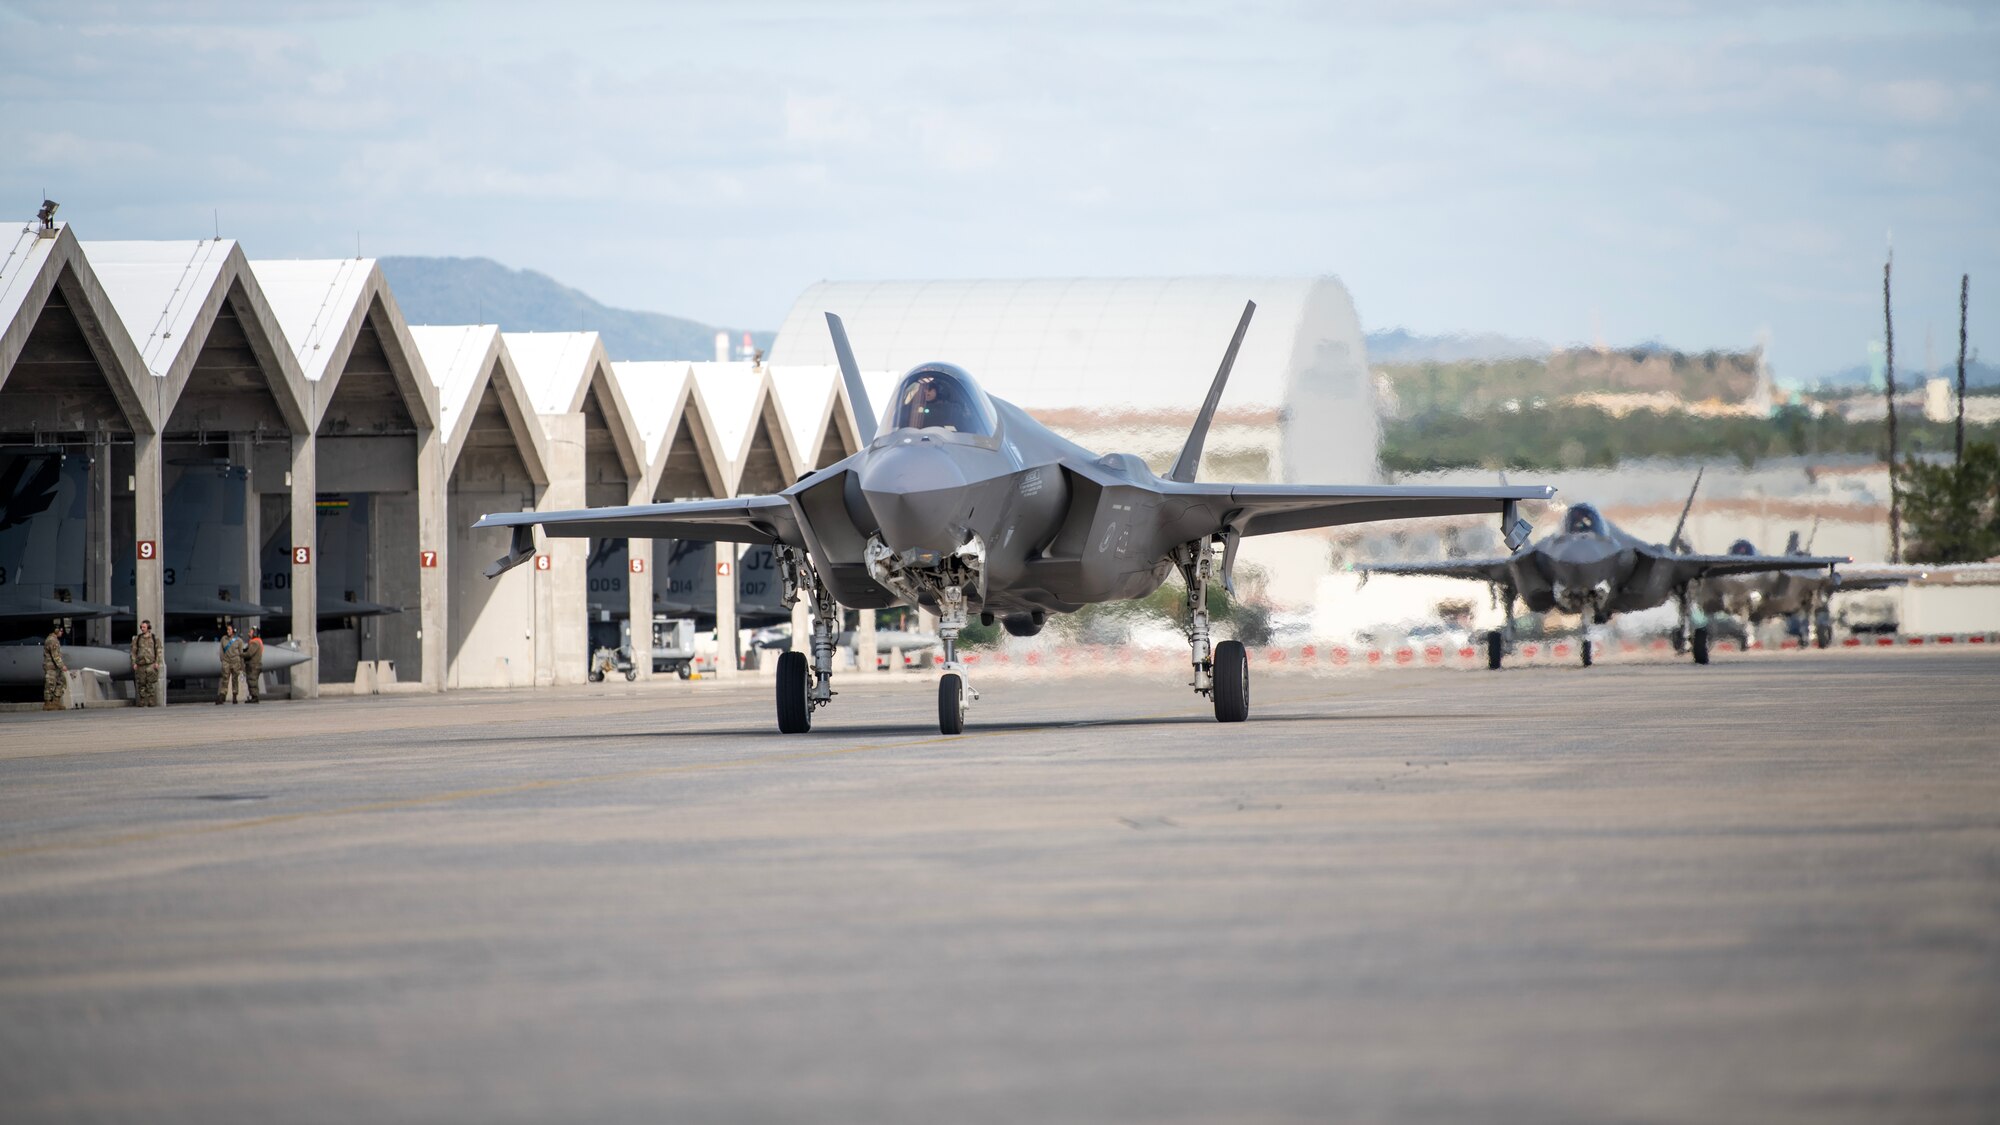 F-35A Lightning II aircraft assigned to the 4th Fighter Squadron, Hill Air Force Base, Utah, arrive at Kadena Air Base, Japan, Nov. 20, 2023. The 4th FS will be joining the 356th Fighter Squadron from Eielson AFB, Alaska, in providing forward-deployed, fifth-generation fighter capabilities to assure allies and deter threats in the Indo-Pacific region. (U.S. Air Force photo by Staff Sgt. Jessi Roth)